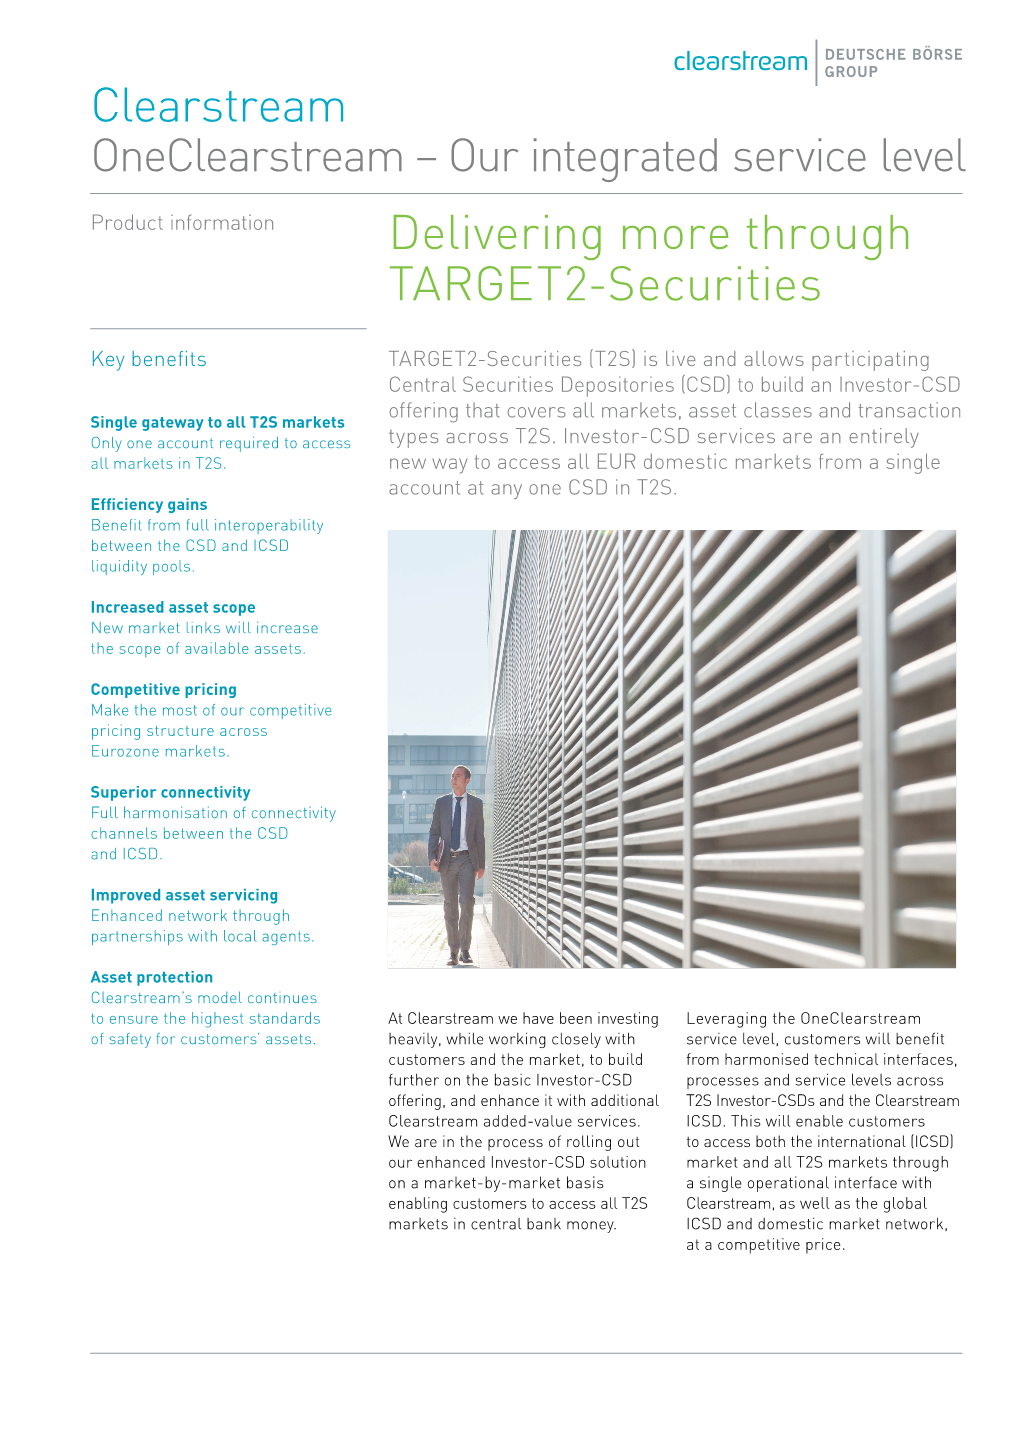 Delivering More Through TARGET2-Securities Clearstream